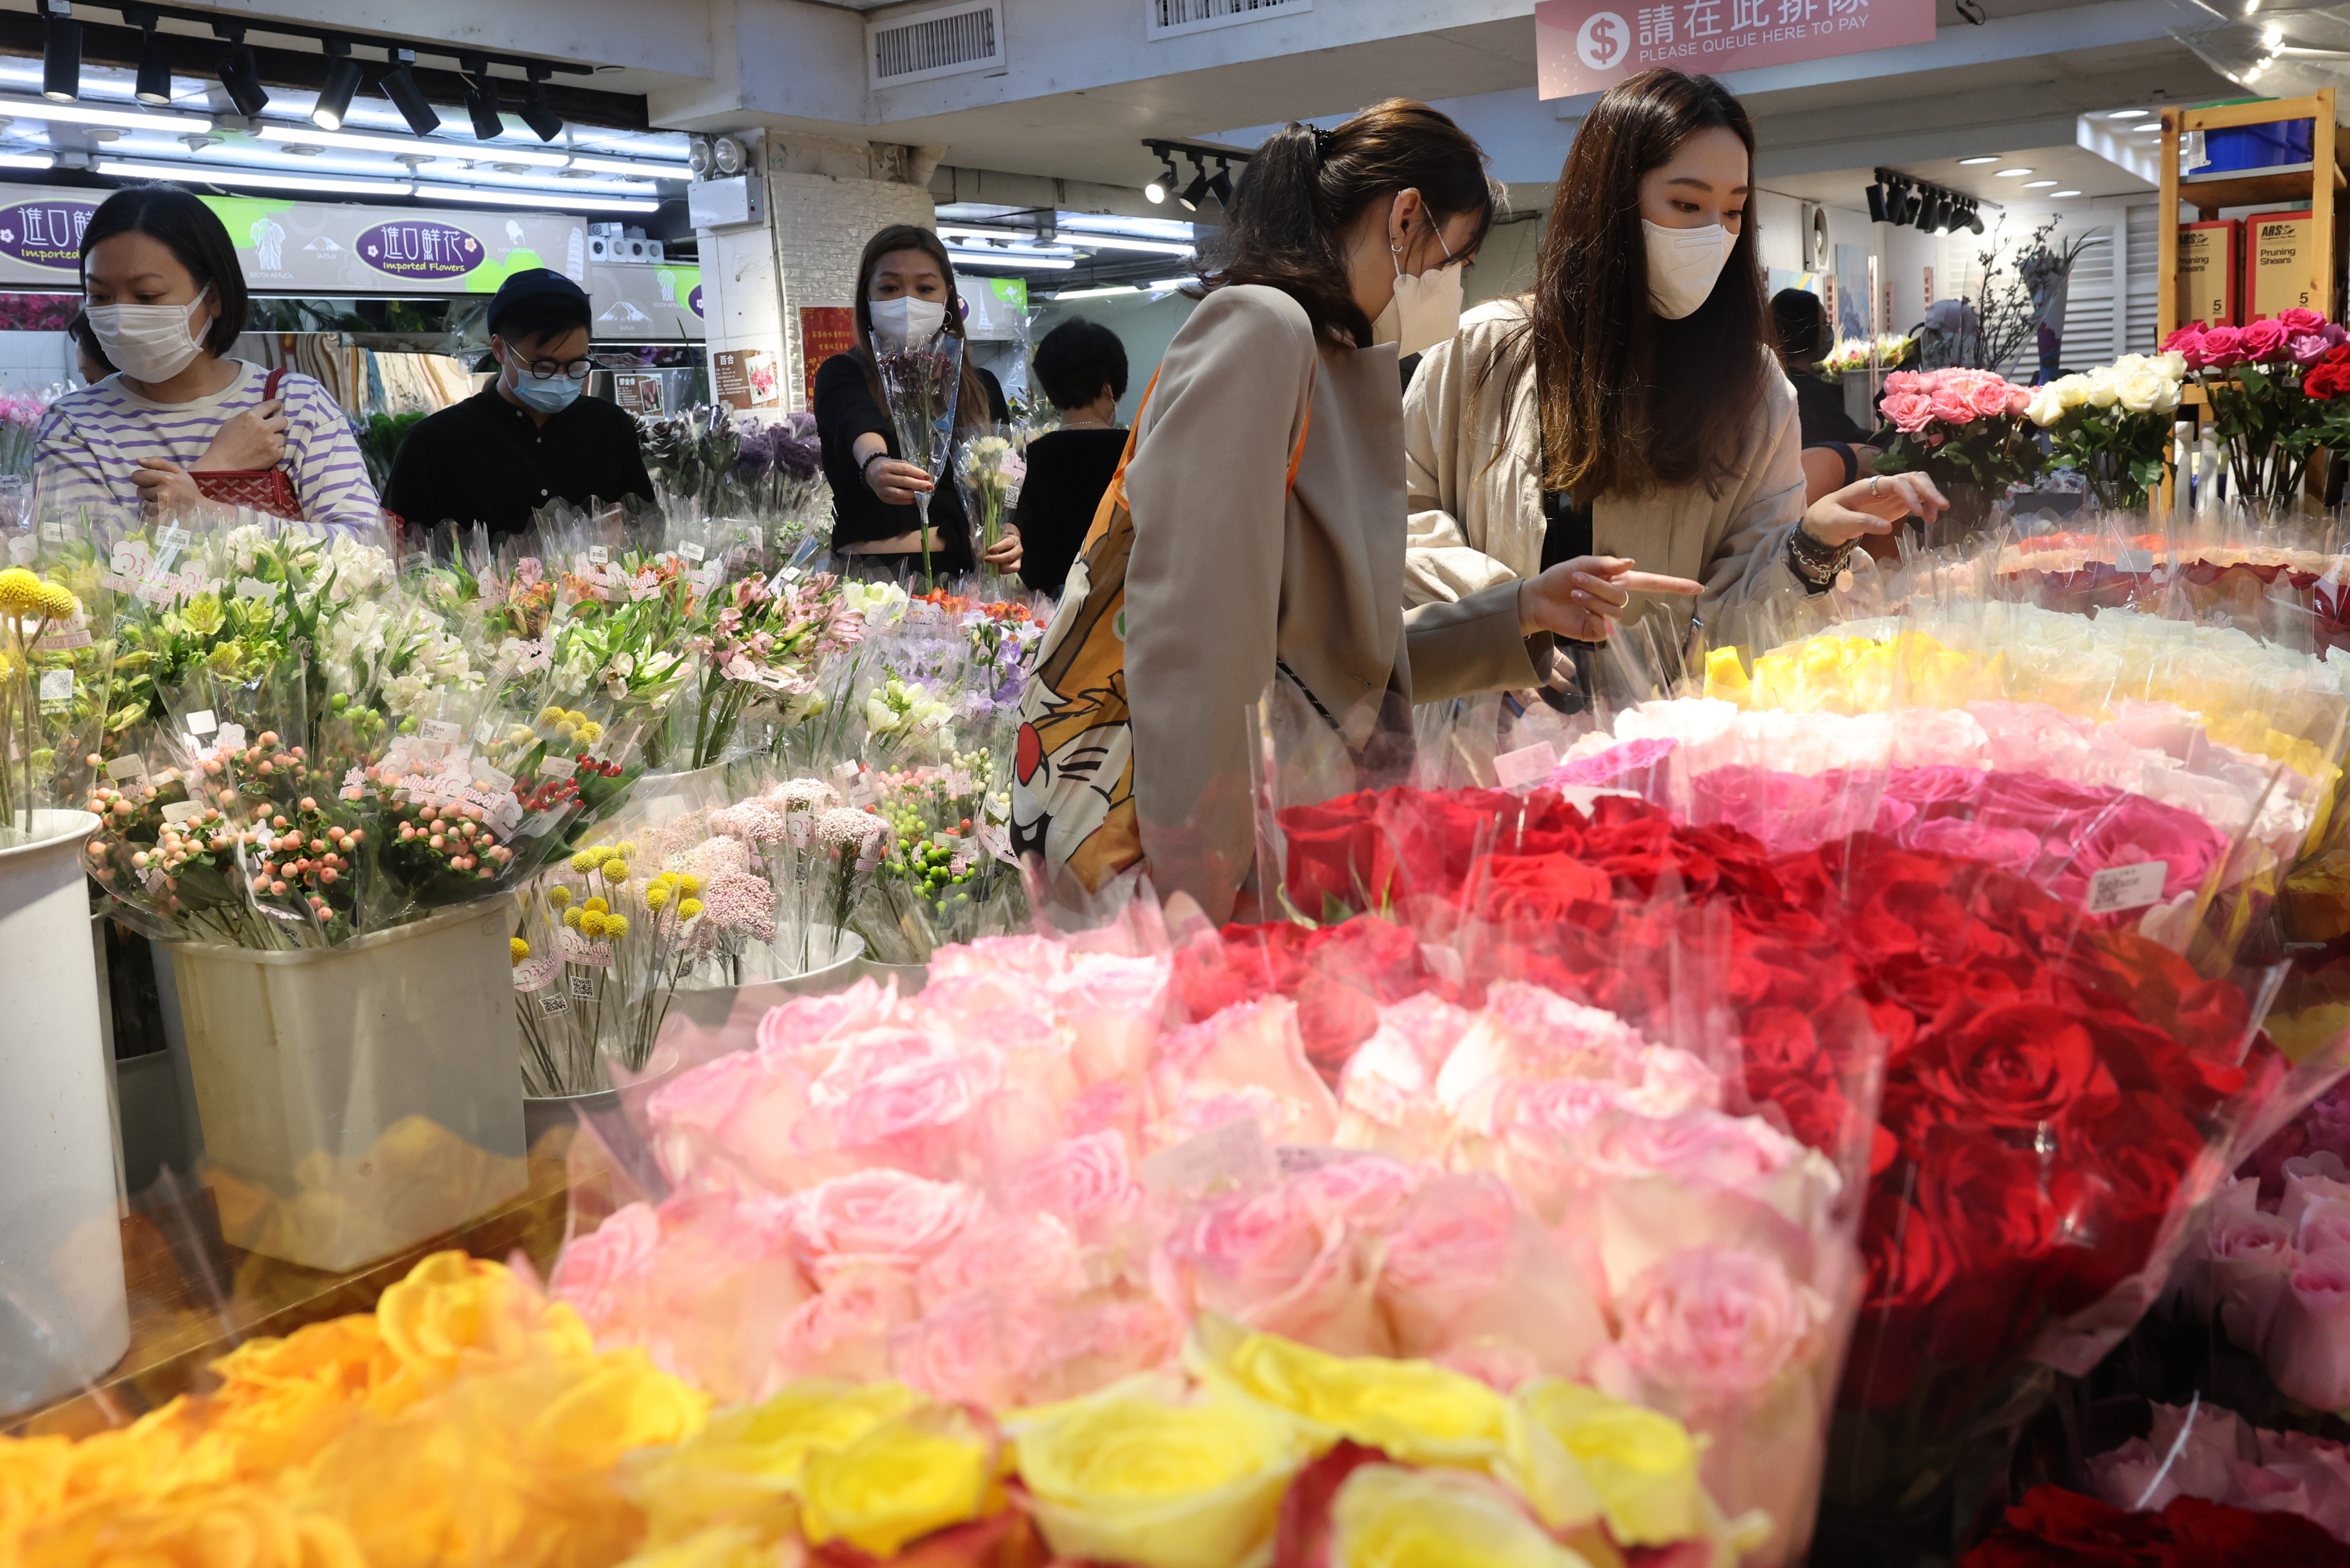 Customers check out the goods at the flower market in Mong Kok. Photo: Edmond So